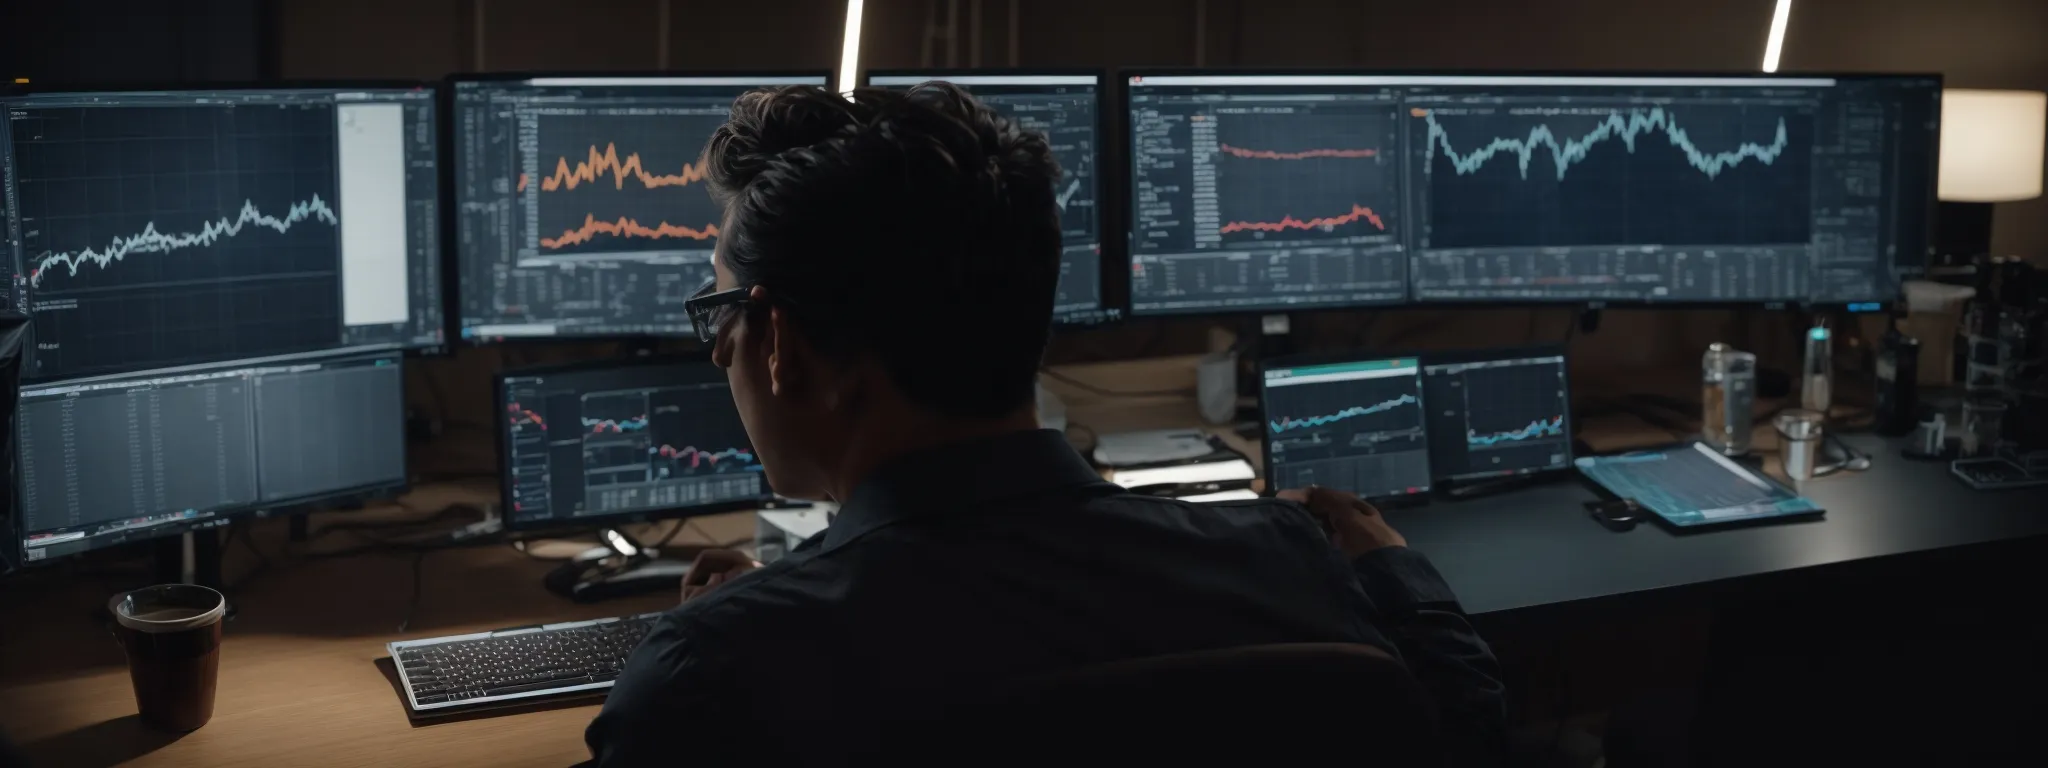 a marketer analyzing complex data visualizations on multiple computer monitors, reflecting an advanced user experience testing environment.